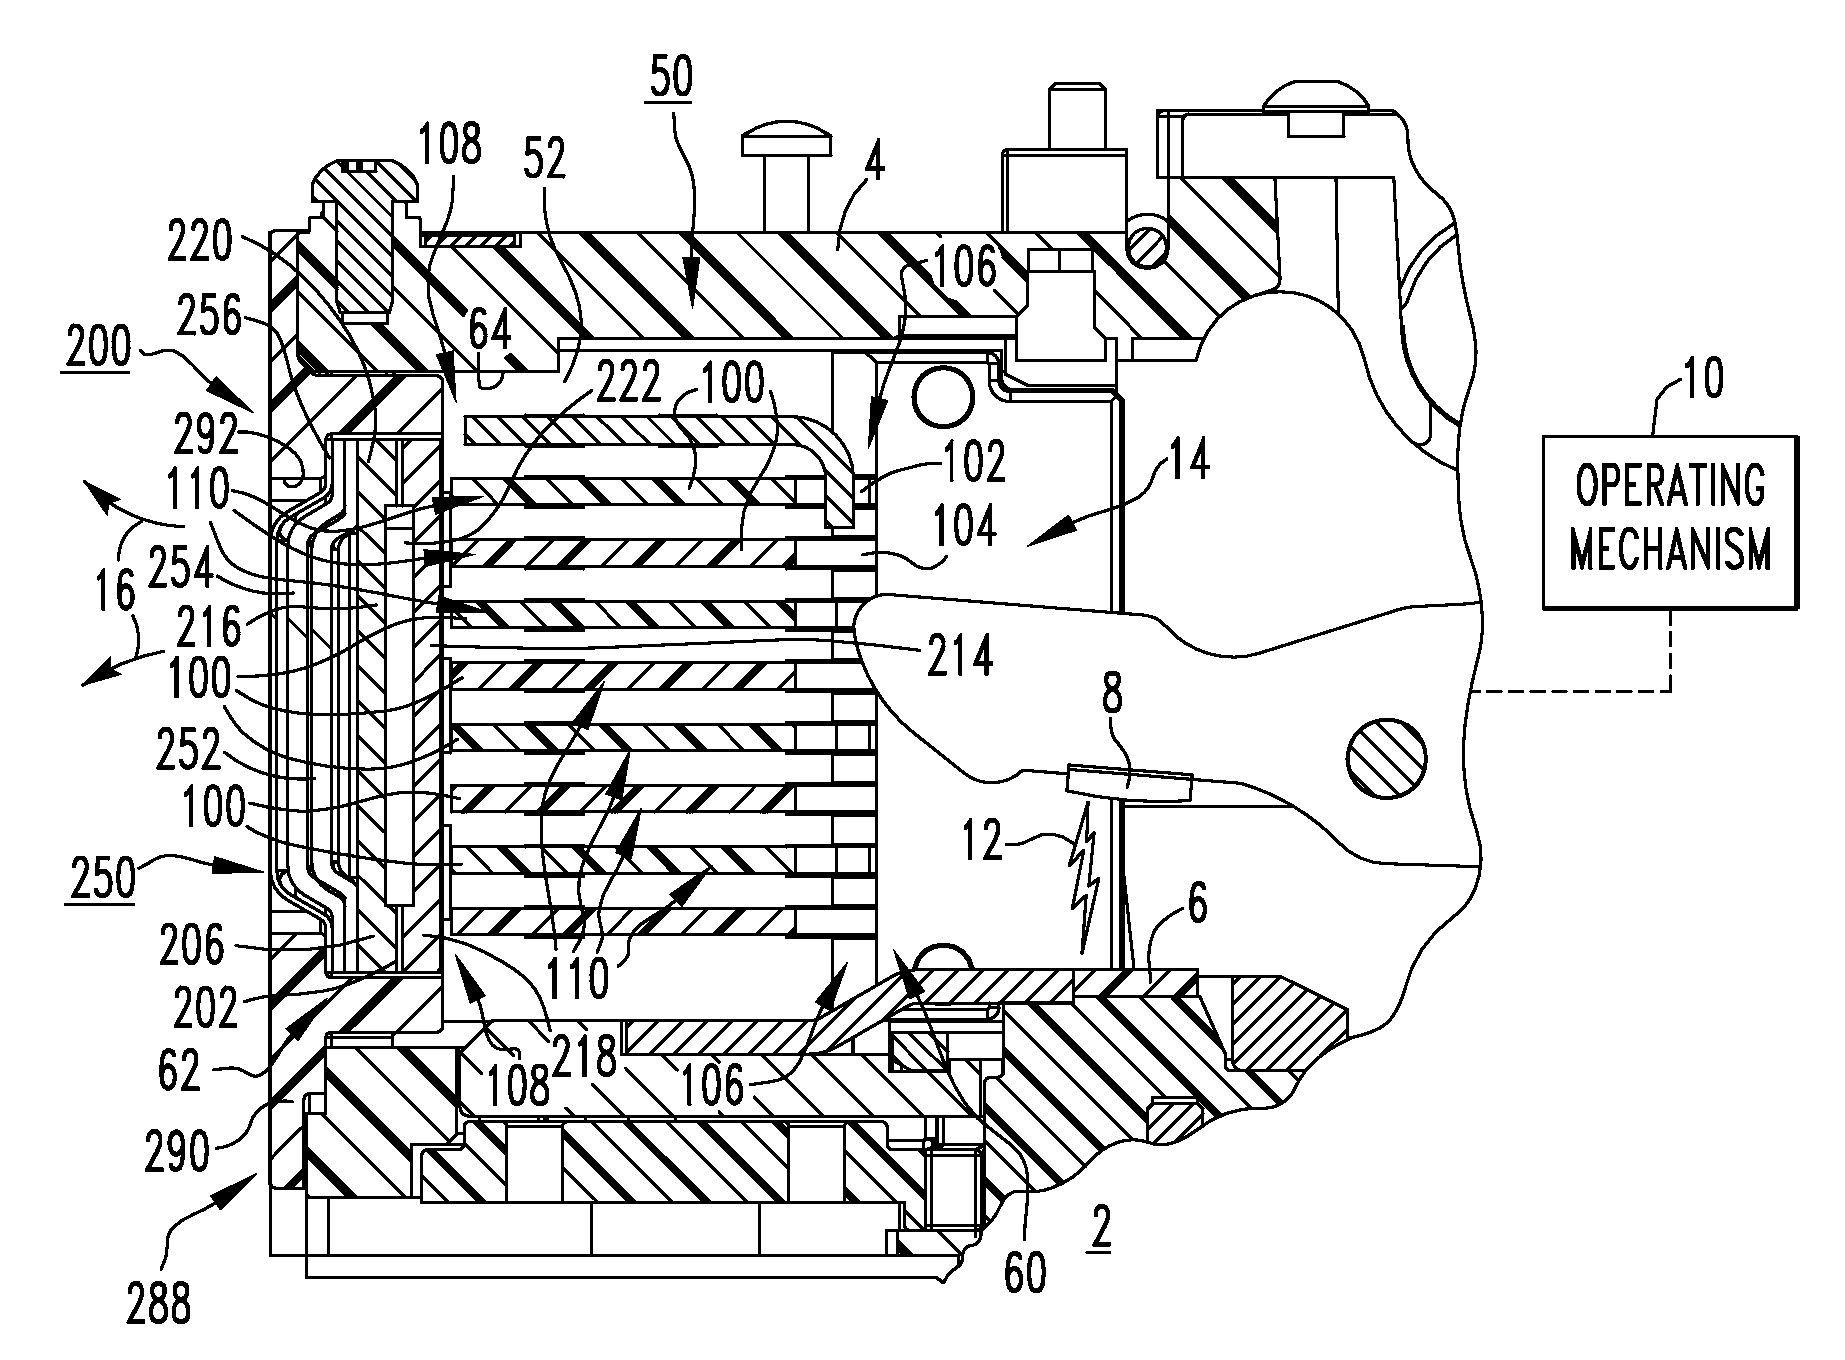 ARC baffle, and ARC chute assembly and electrical switching apparatus employing the same